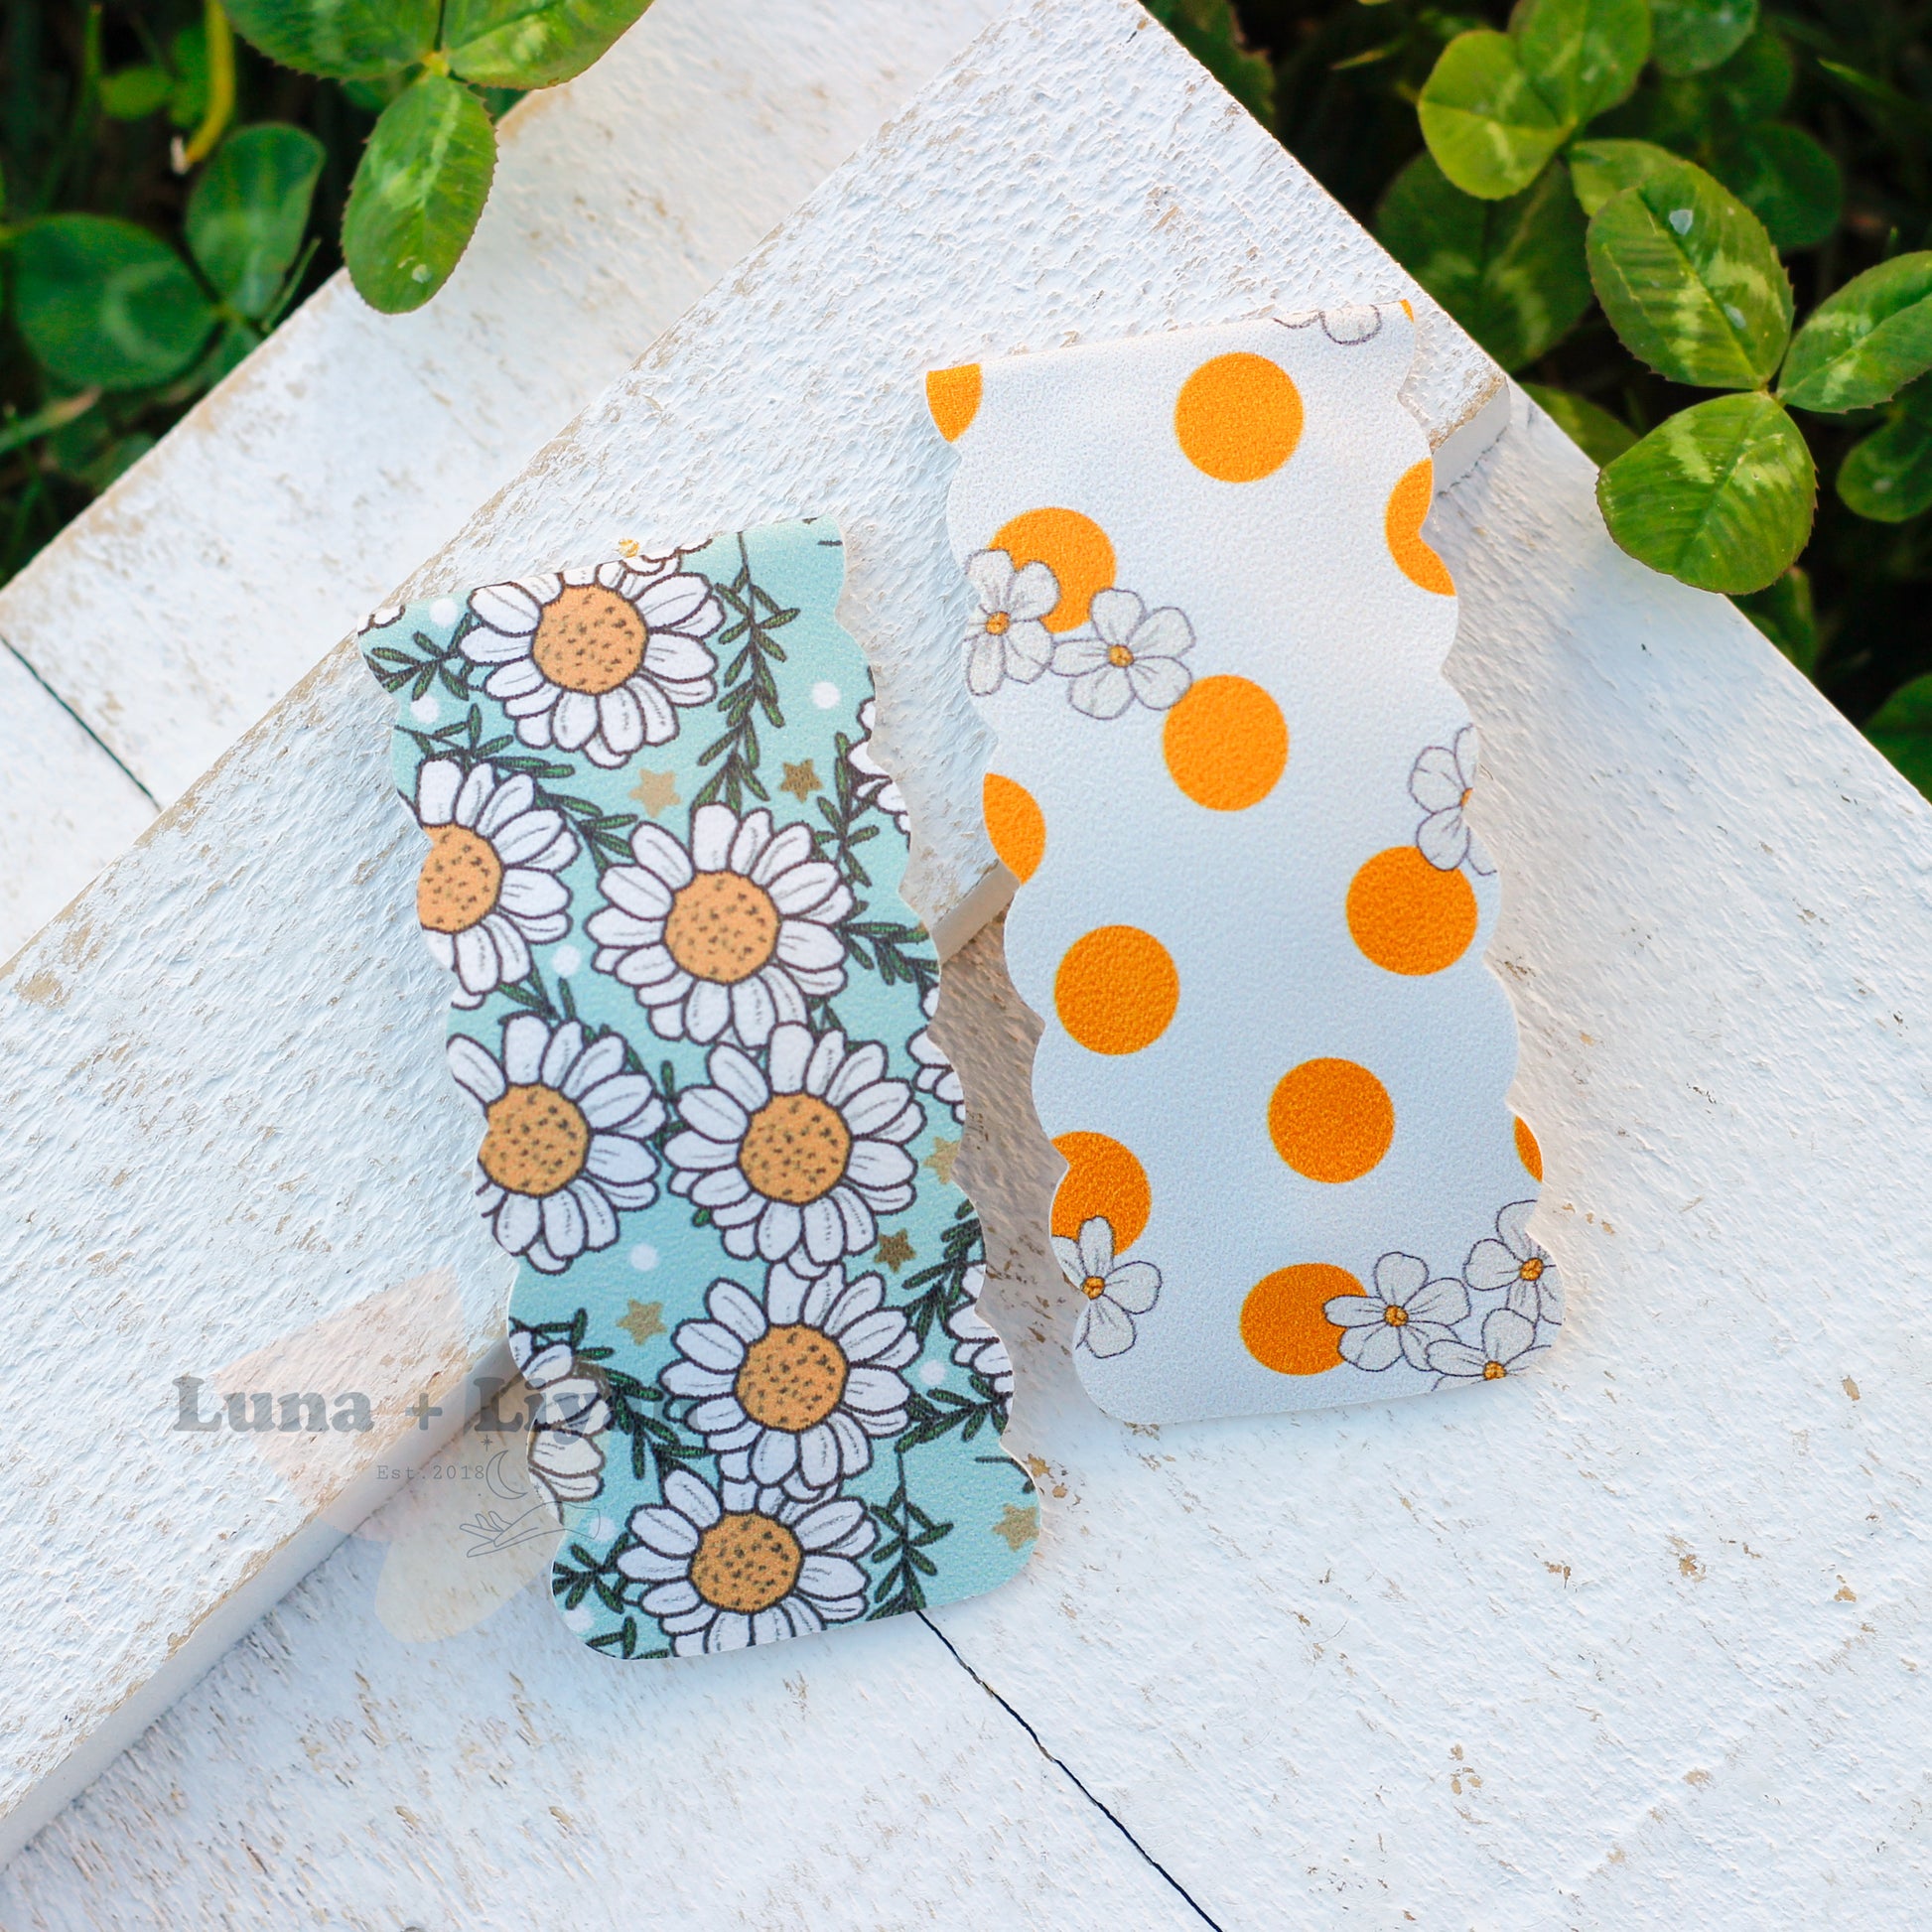 snap clip - blue daisy/marigold dots and flowers